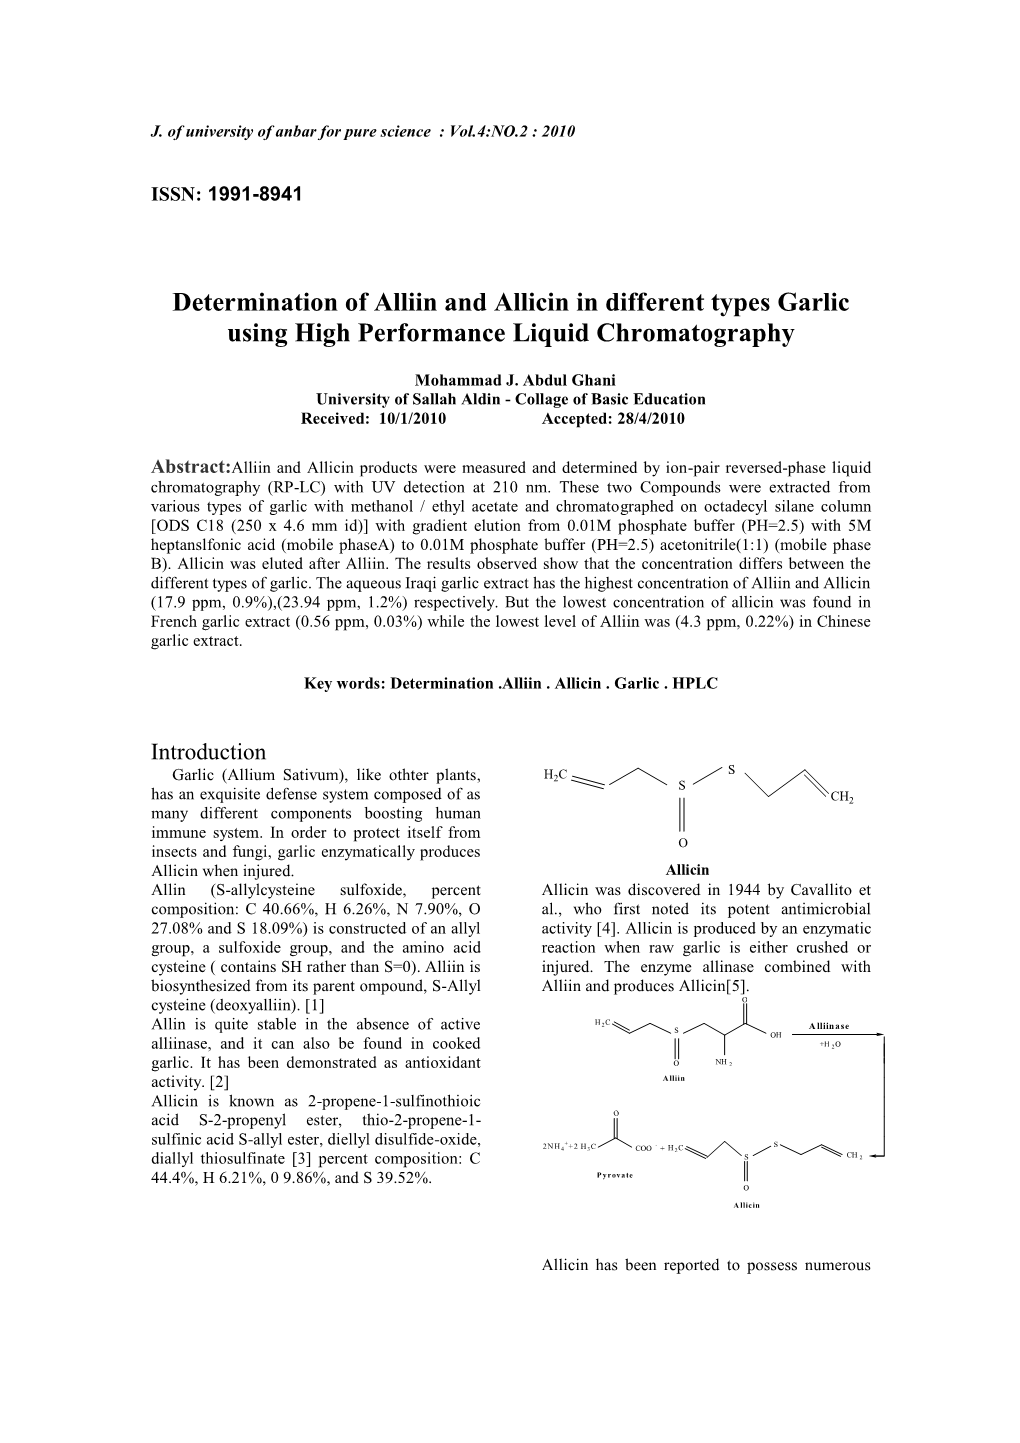 Determination of Alliin and Allicin in Different Types Garlic Using High Performance Liquid Chromatography